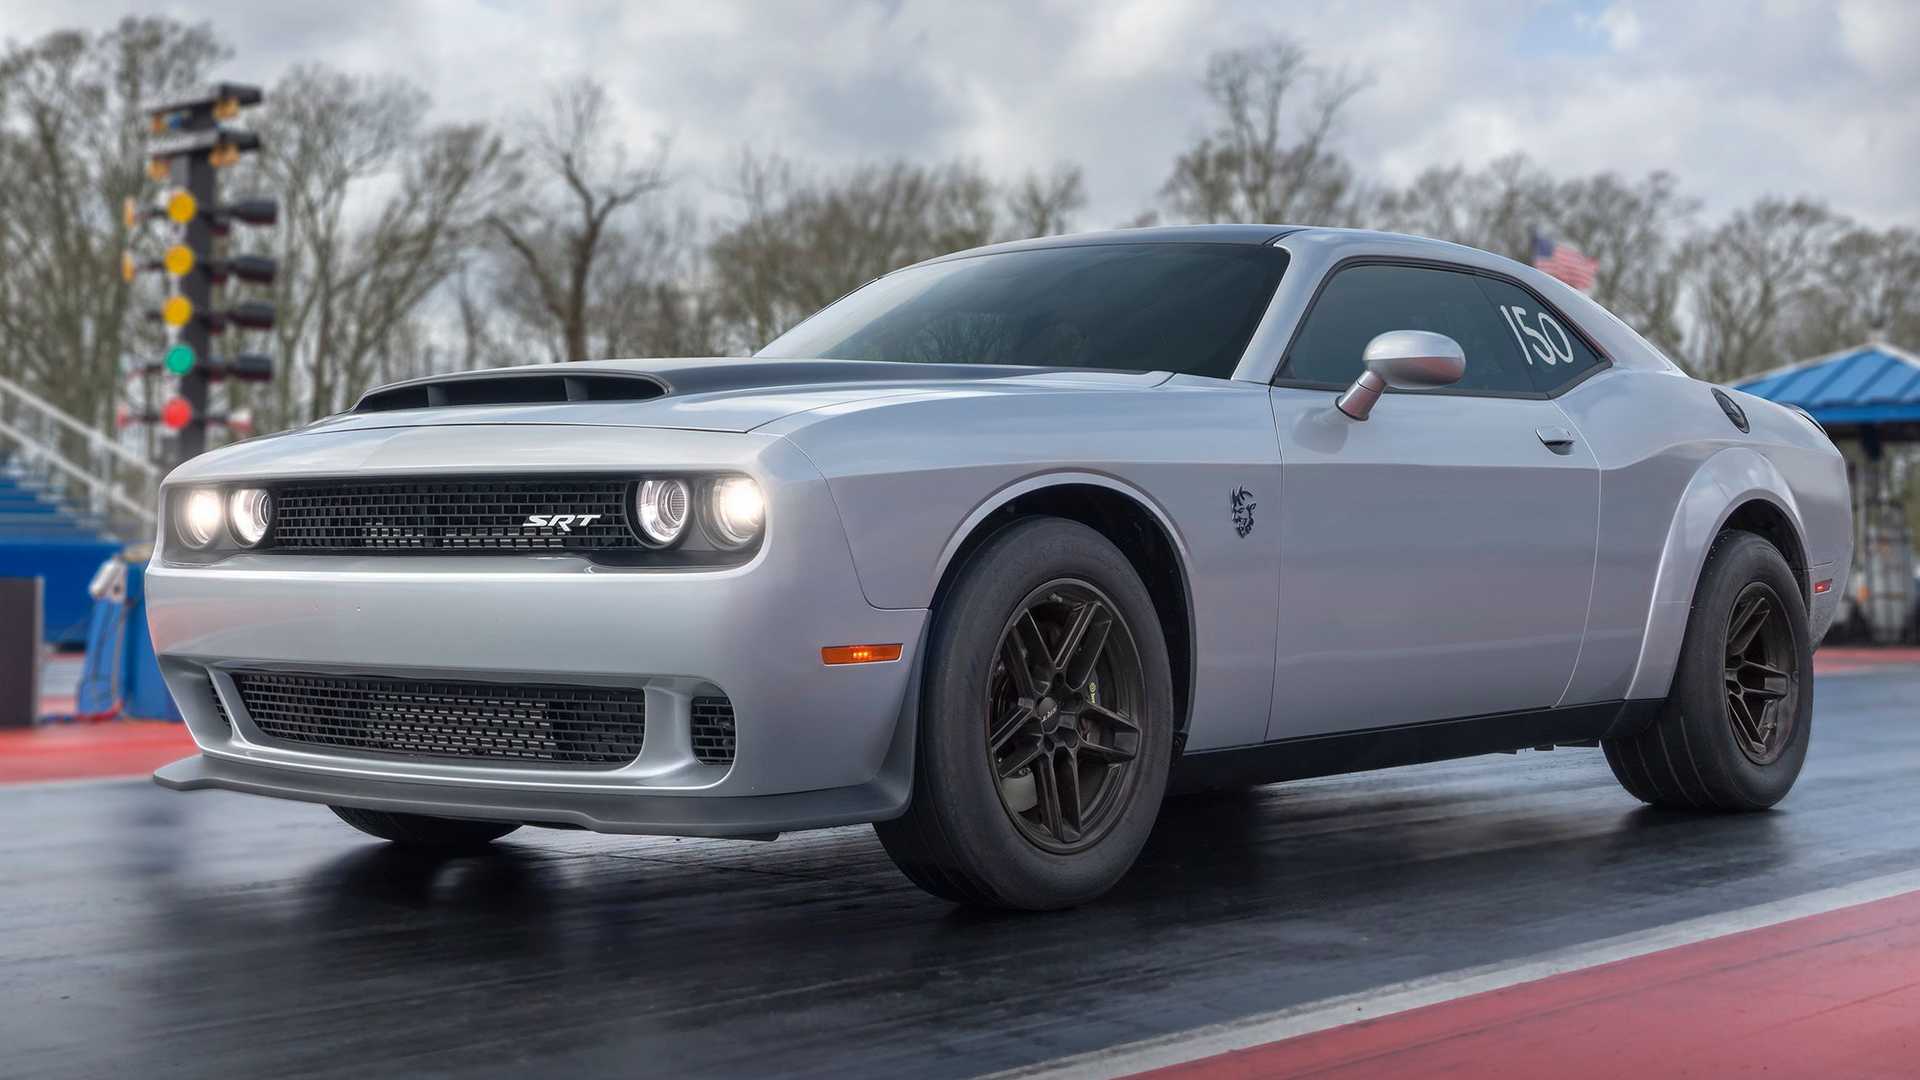 2023 Dodge Challenger SRT Demon 170 Makes 1,025 HP, And It’s an 8s